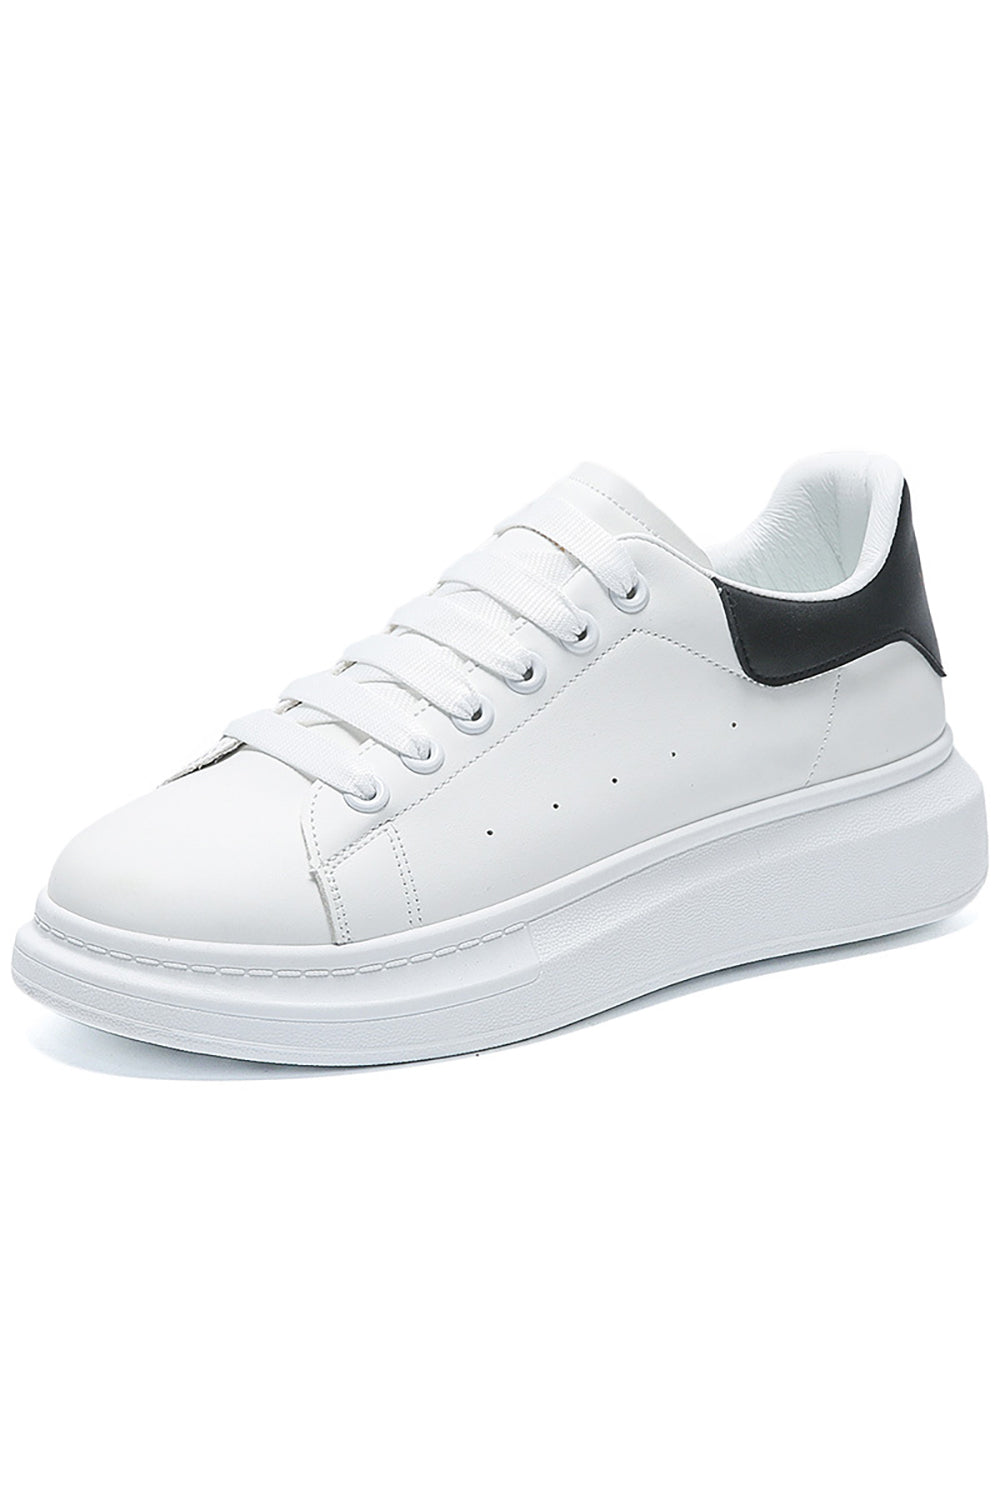 Casual White Light Weight Fashion Sneaker